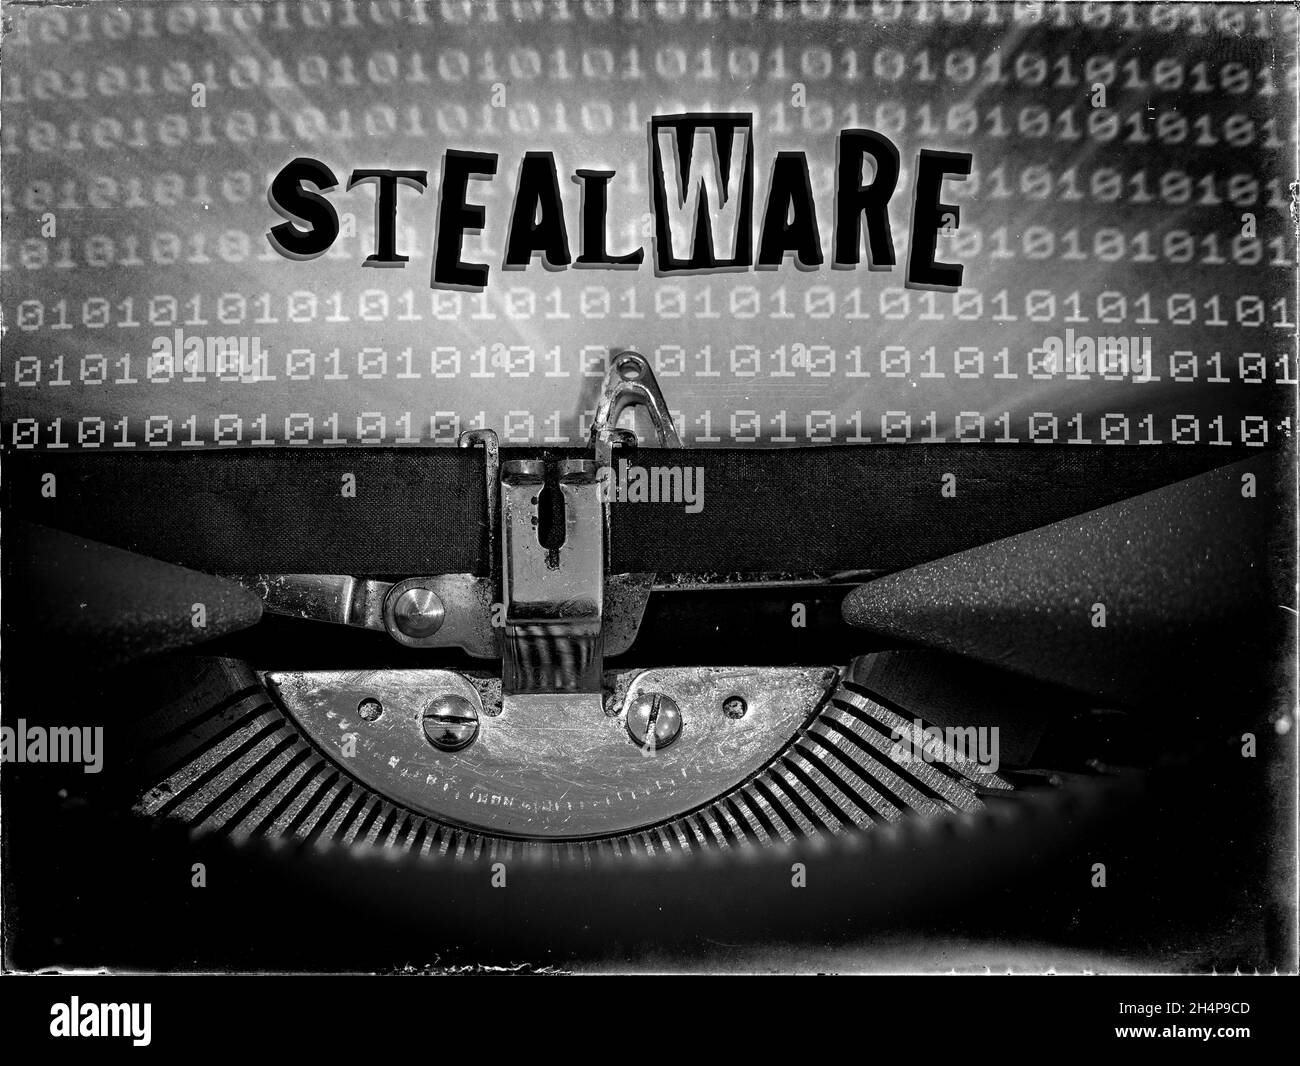 Stealware displayed on a vintage typewriter with a binary code background Stock Photo